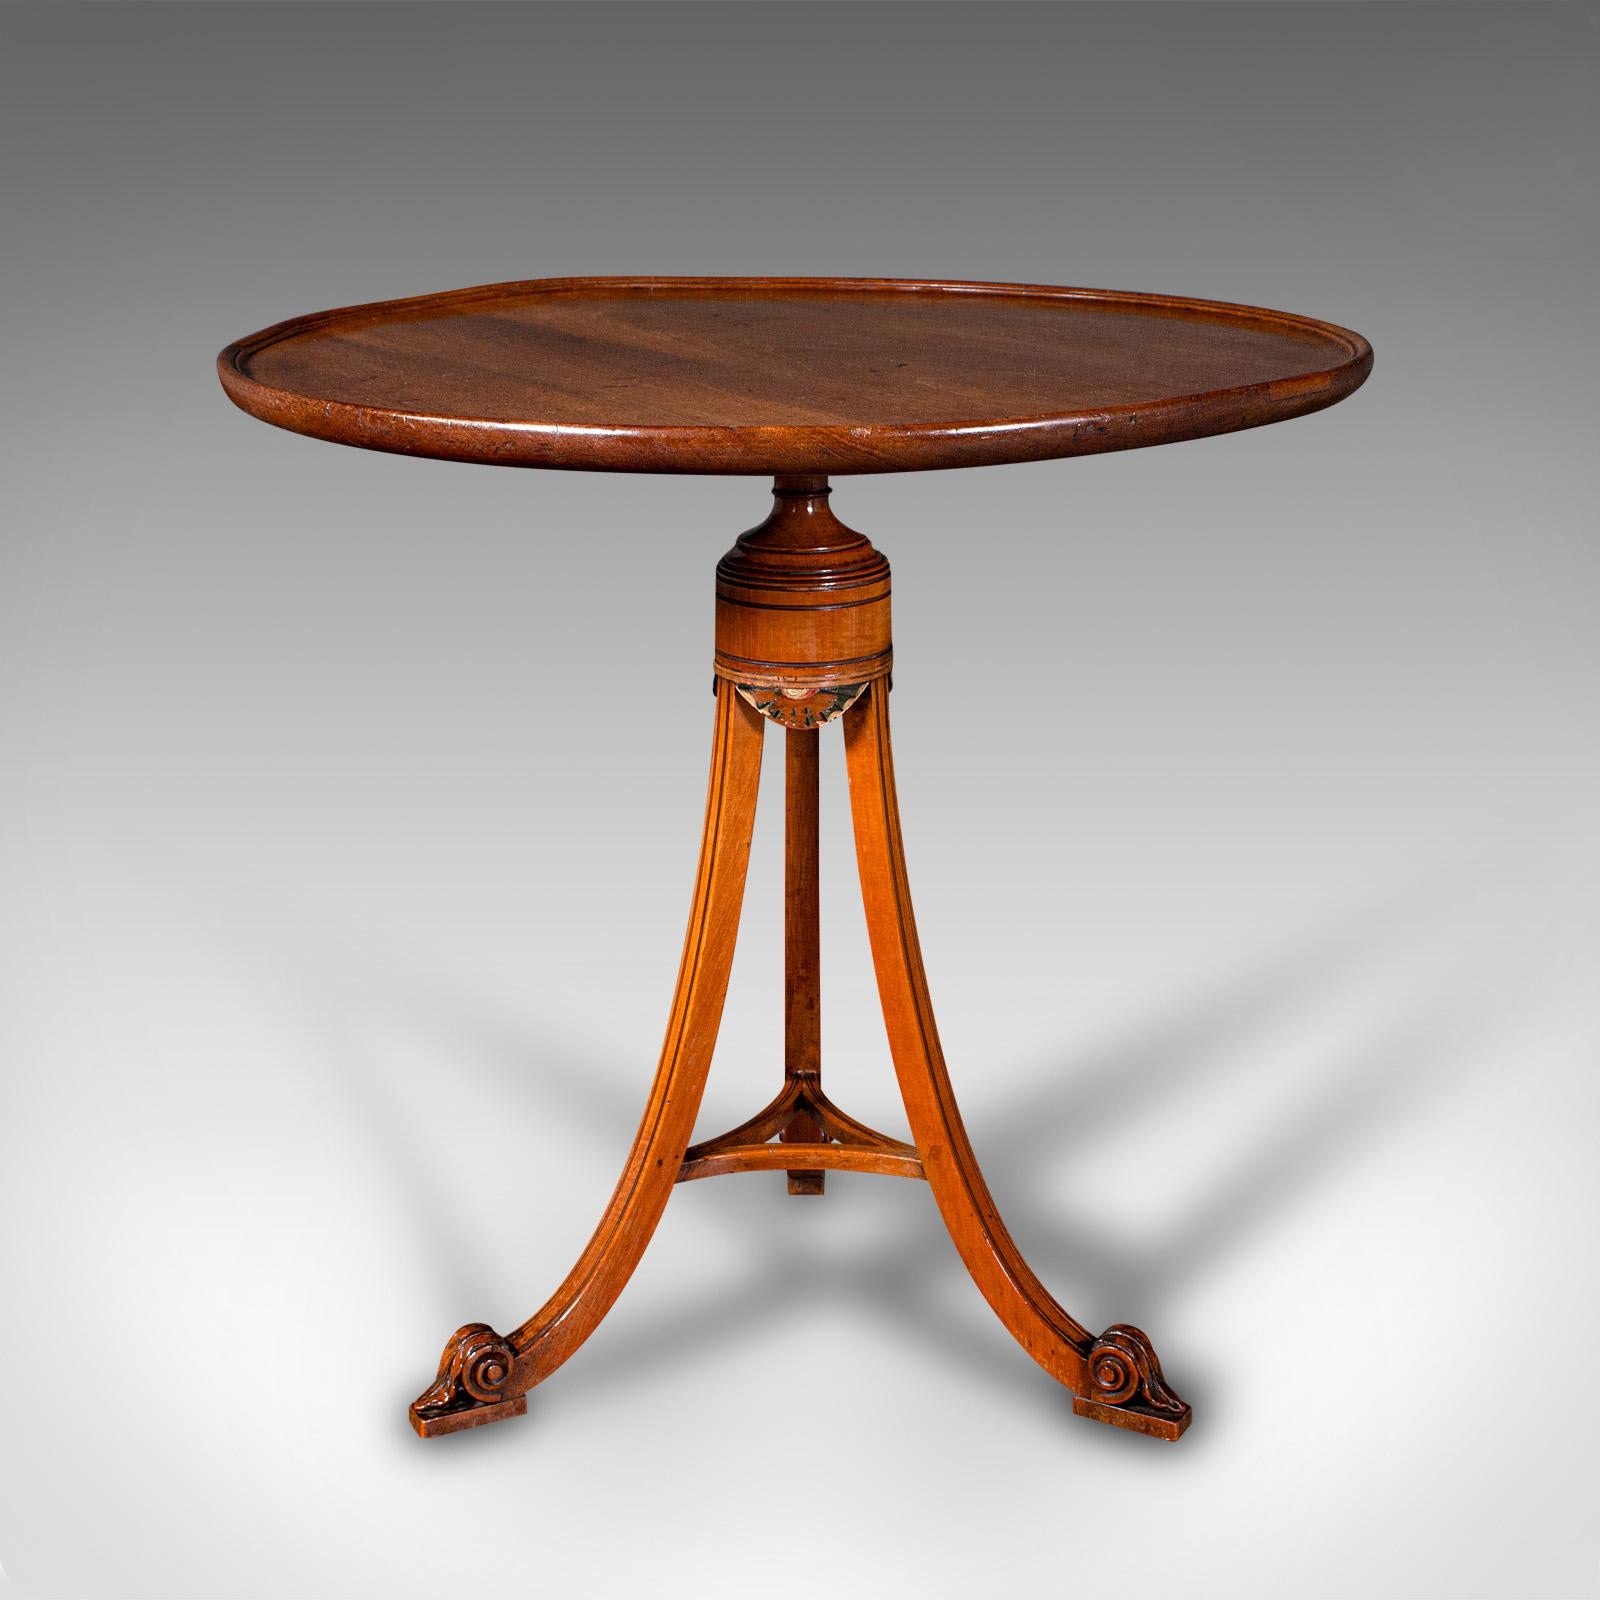 This is a small antique wine table. An English, mahogany and satinwood tripod lamp table, dating to the Regency period and later, circa 1820.

Graceful craftsmanship with a delightful eye-catching colour
Displays a desirable aged patina and in good